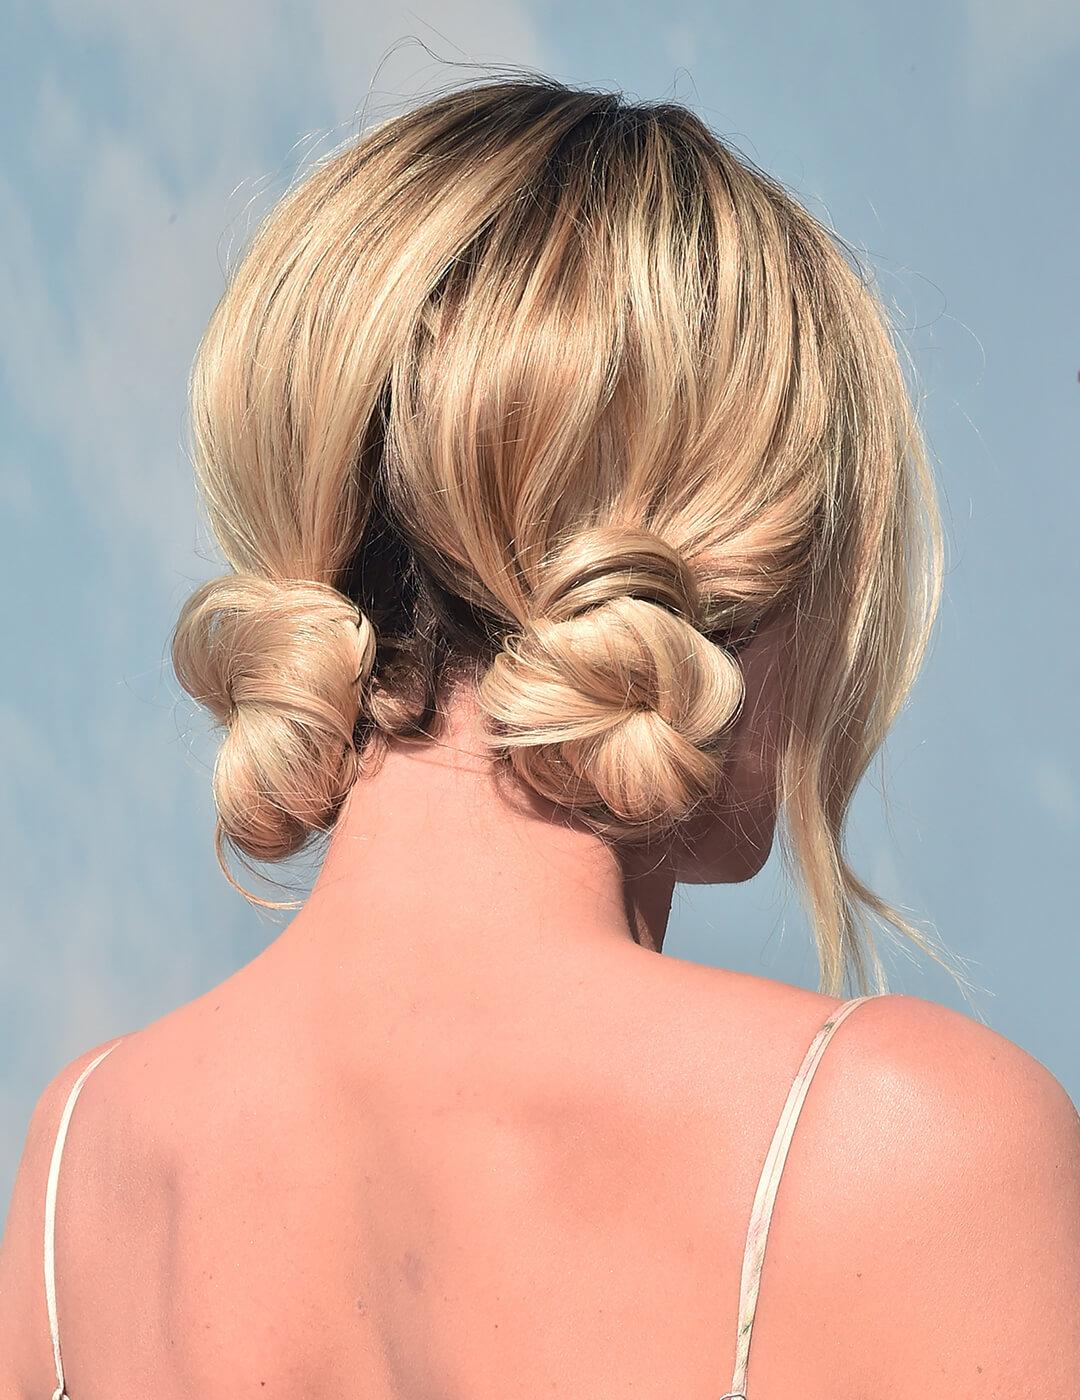 Margot Robbie facing back showing off her double knots hairstyle